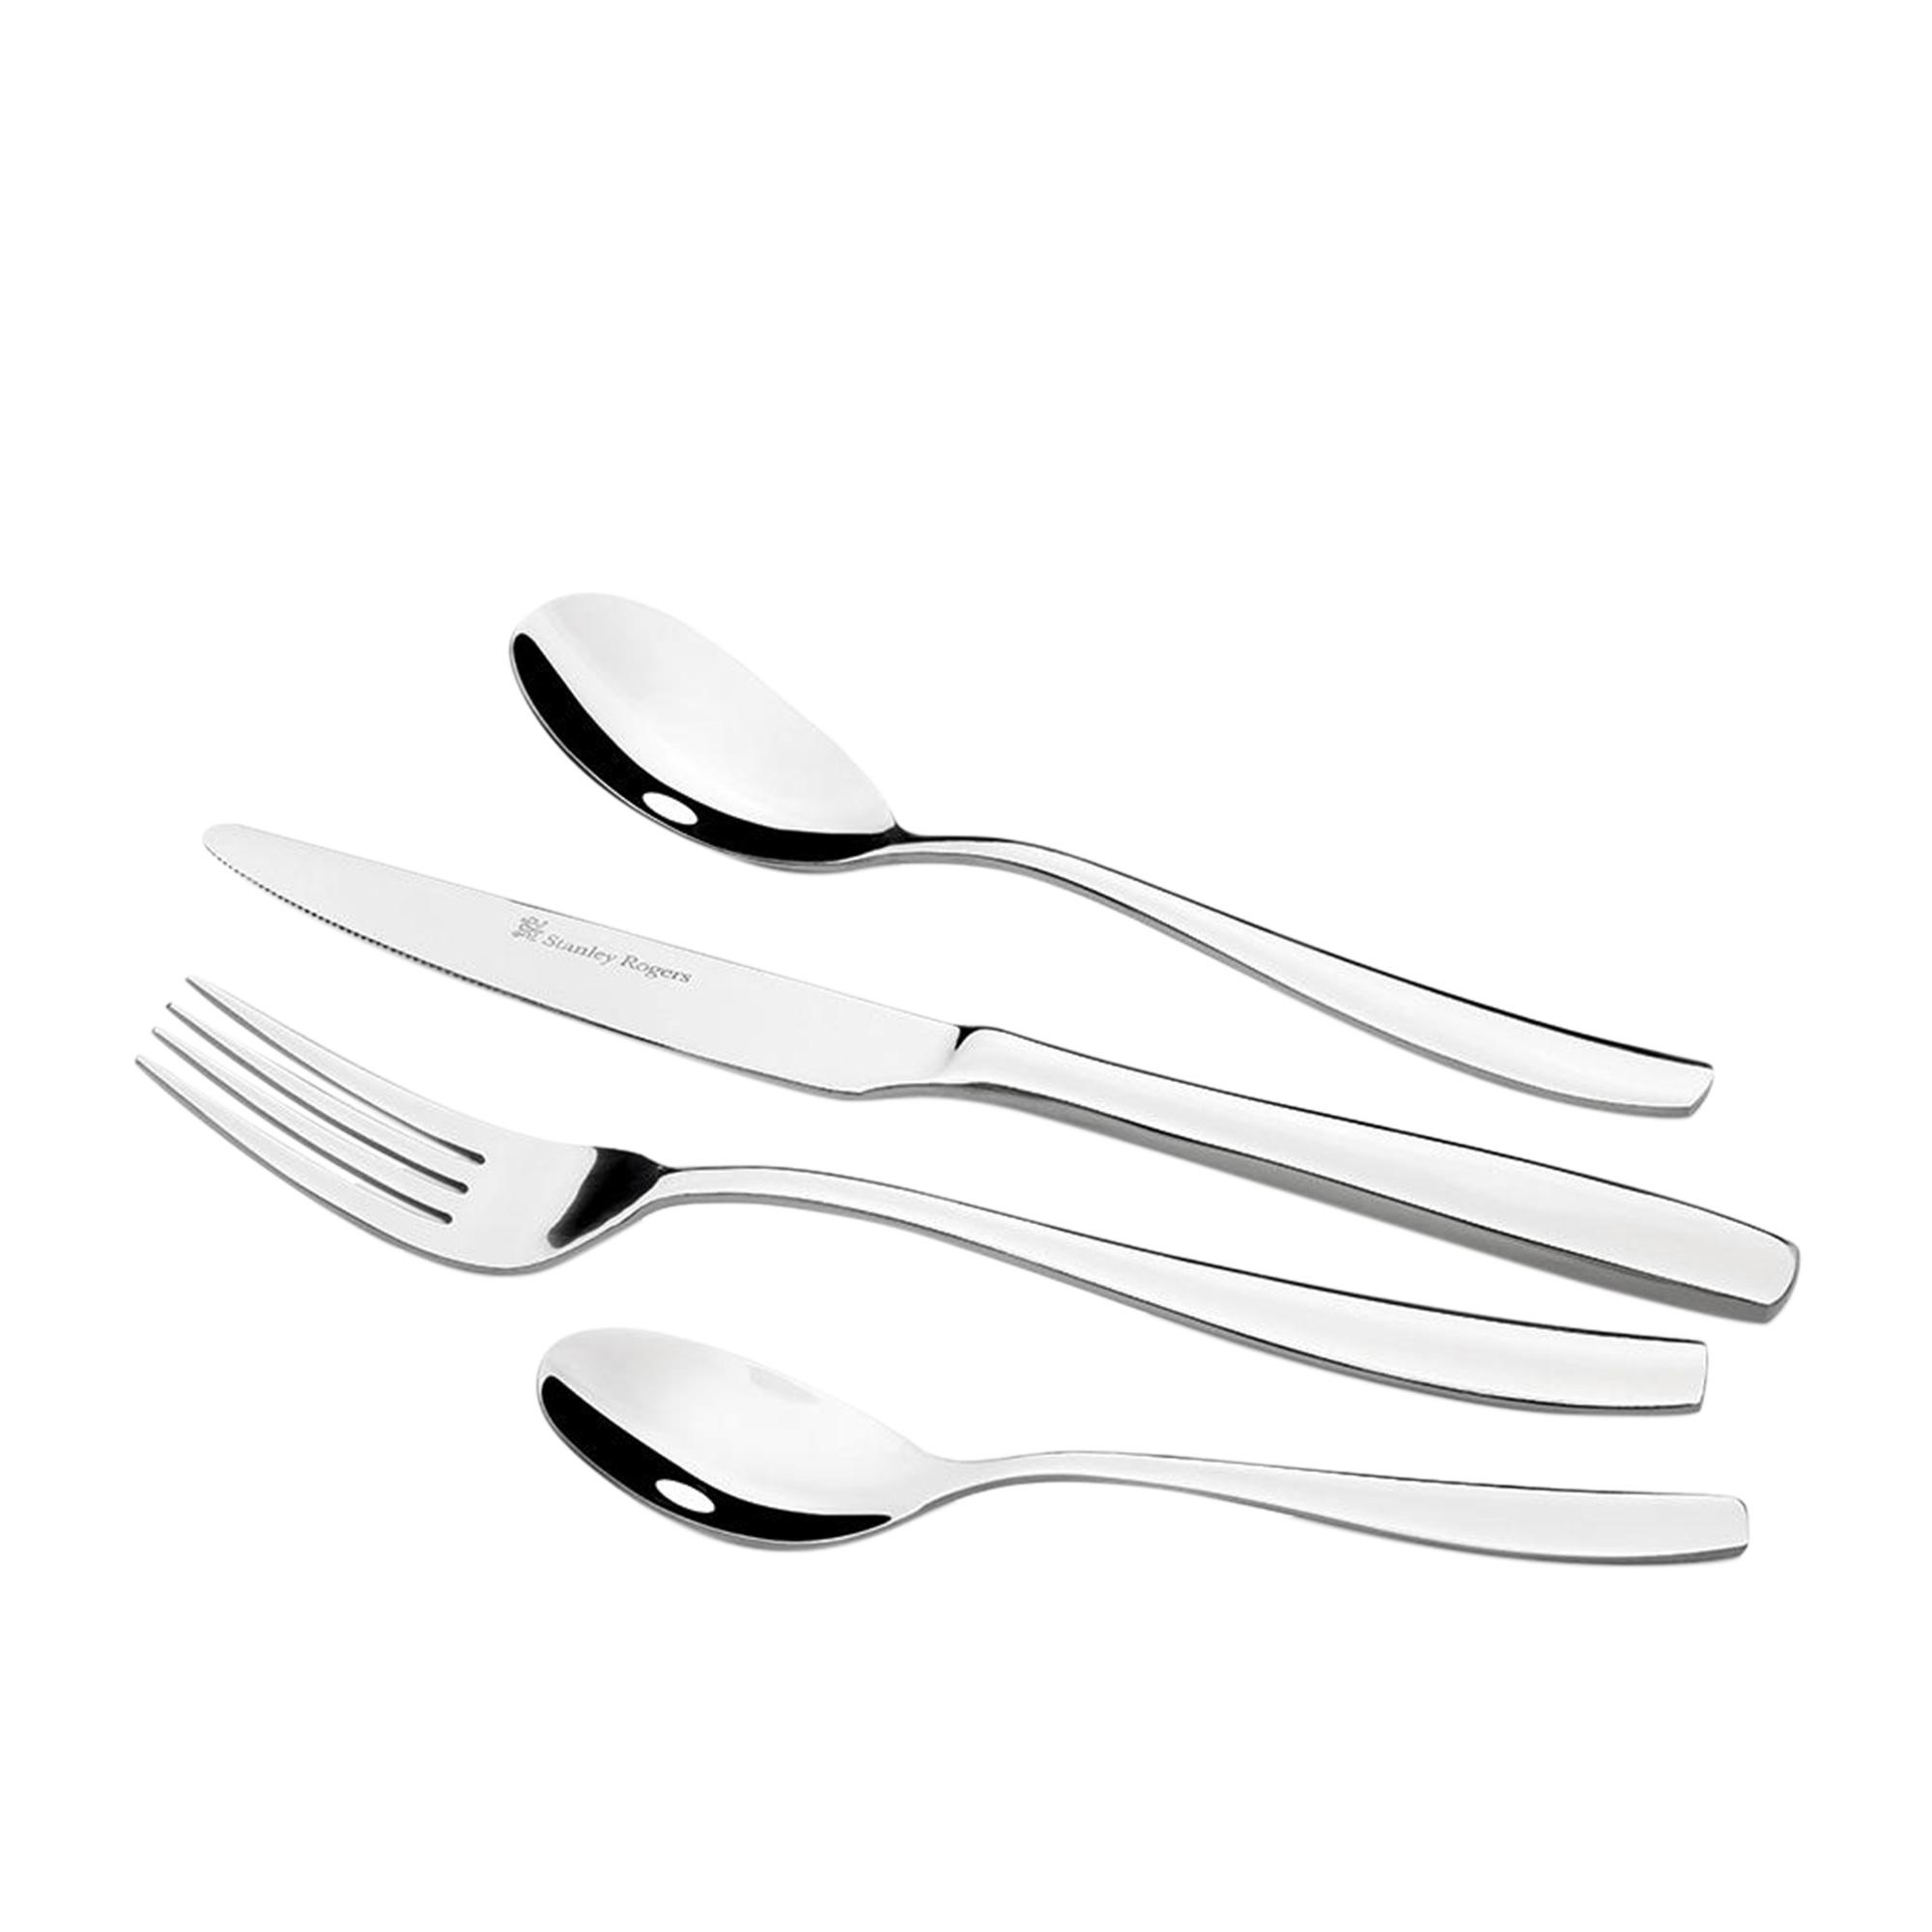 Stanley Rogers Amsterdam Cutlery Set 56pc Image 2